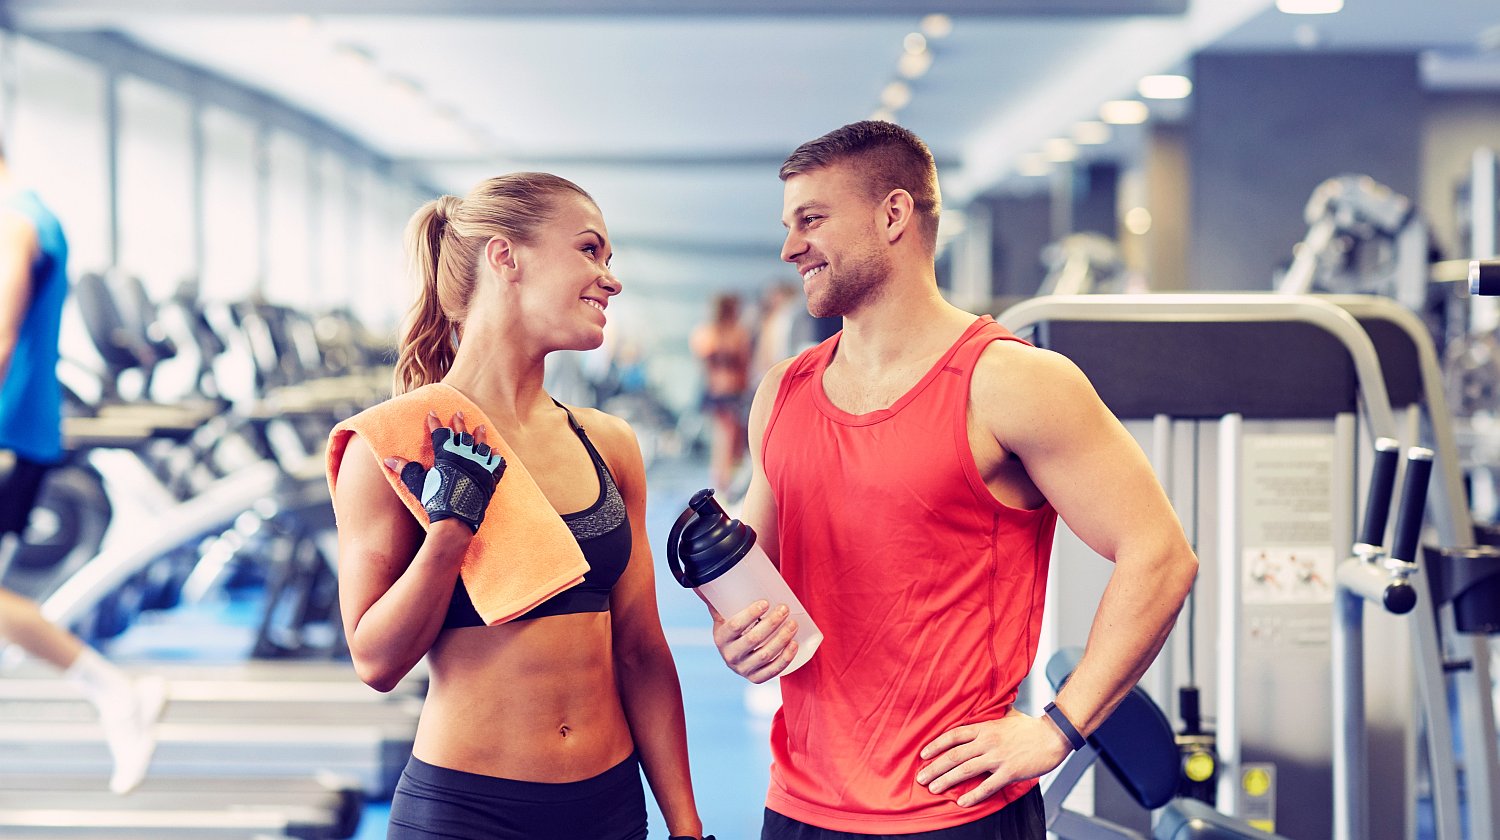 Feature | Smiling couple after work out | The Importance Of Good Hydration When Working Out